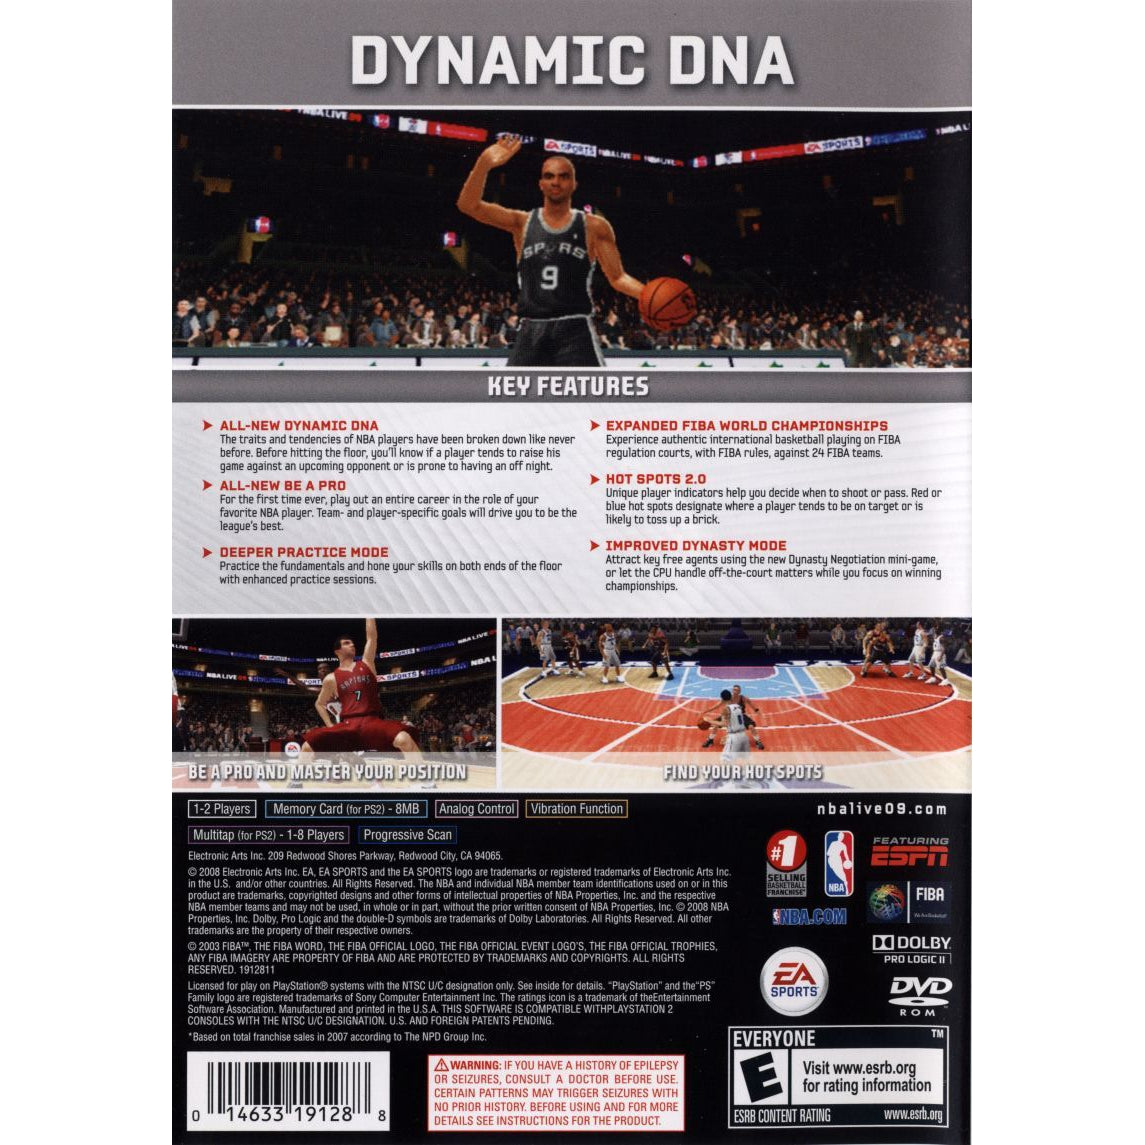 NBA Live 09 - PlayStation 2 (PS2) Game Complete - YourGamingShop.com - Buy, Sell, Trade Video Games Online. 120 Day Warranty. Satisfaction Guaranteed.